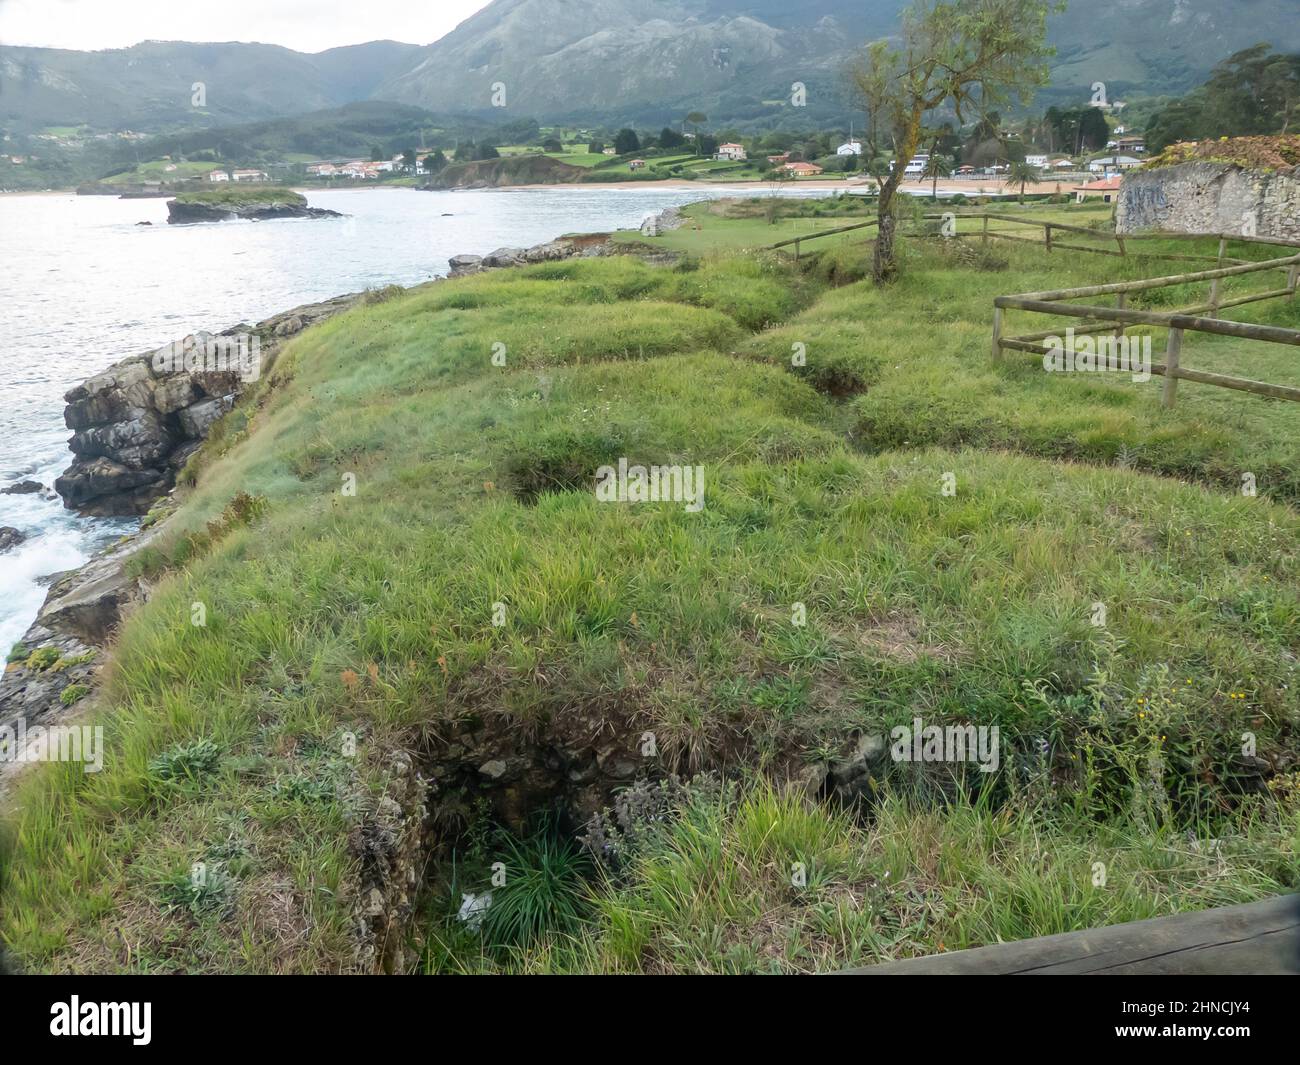 La Isla in Spain: defensive trenches from the Spanish Civil War Stock Photo